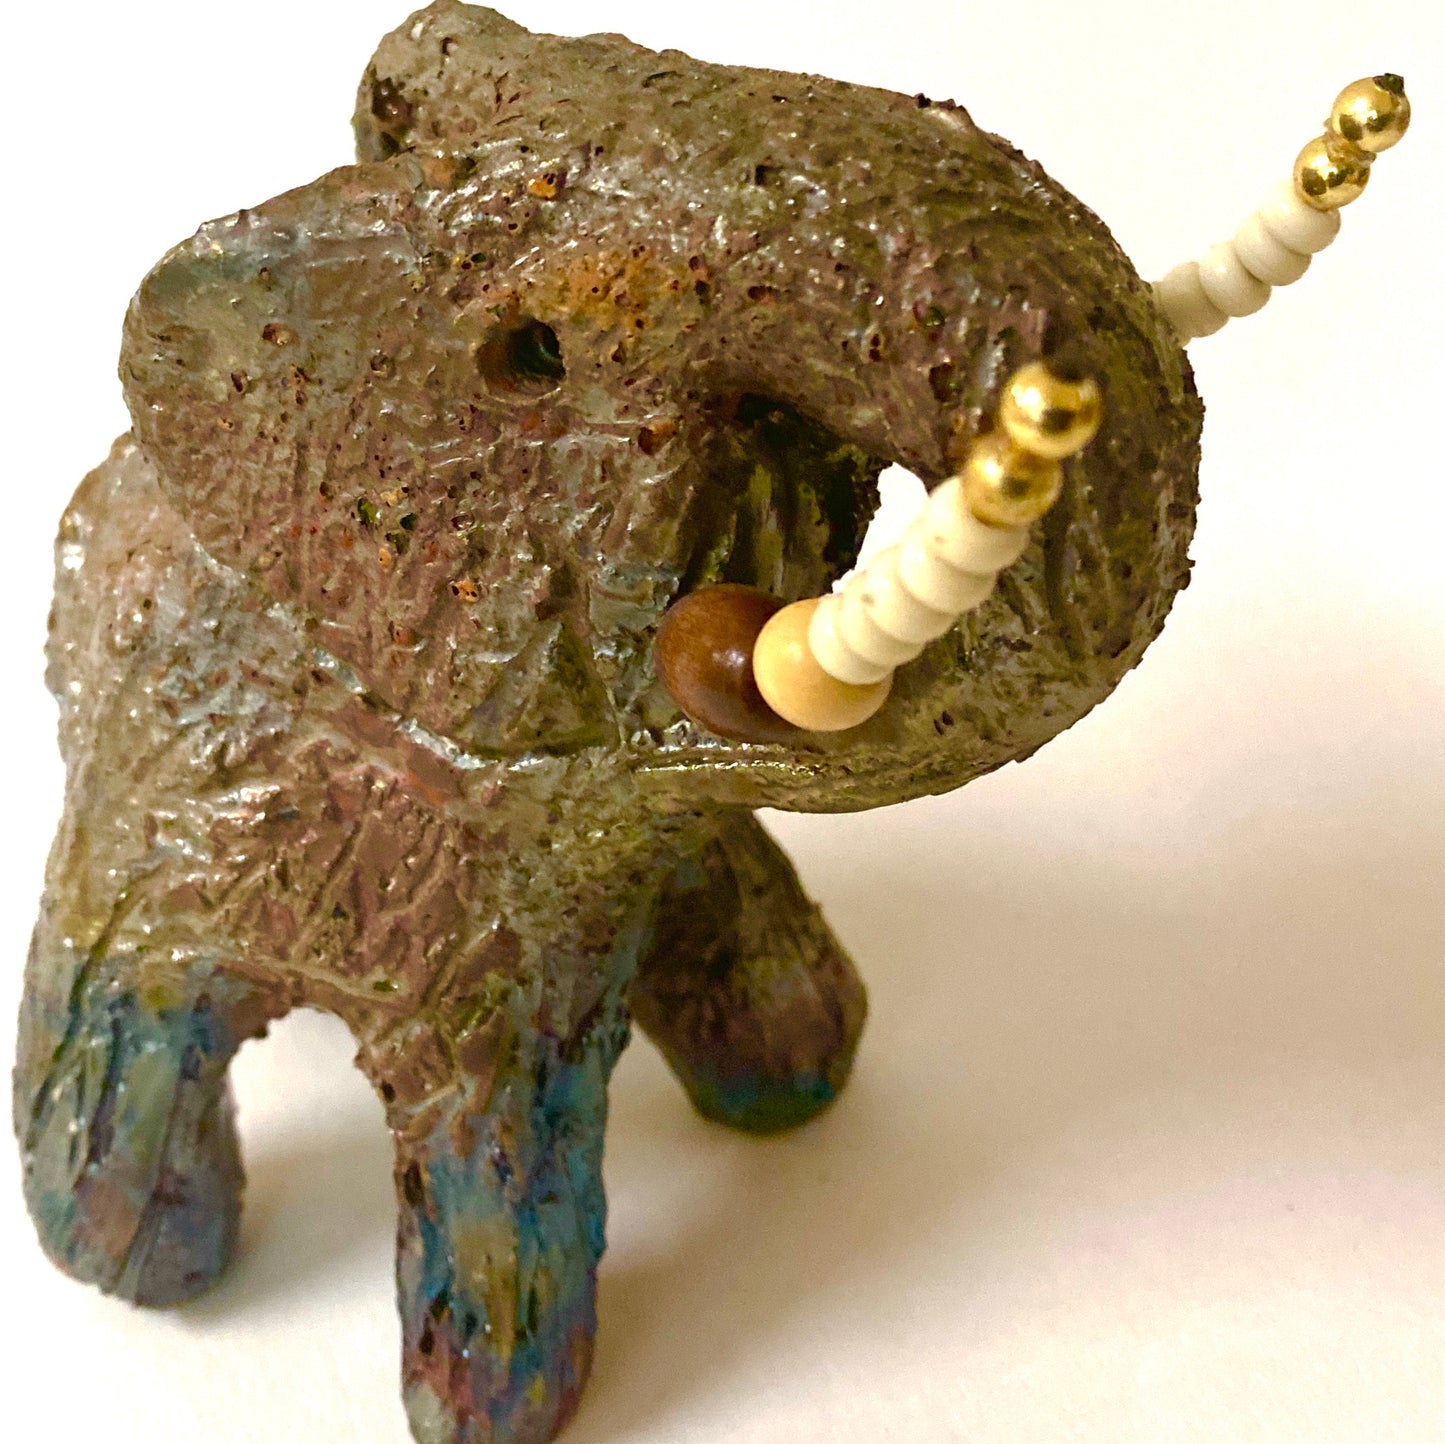 Have you HERD!!!!!!     Elephants are one of my favorite animals to create. They are so majestic"  Just one of these lovely Raku Fired Elephant will make an excellent gift for your  BFF,  or just for you .    This raku fired elephant sits 5" x 4" x 4" and weighs 1 lbs. She has beaded tusks and a textured copper charcoal body. This one will be nice to add your Herdew Collection!